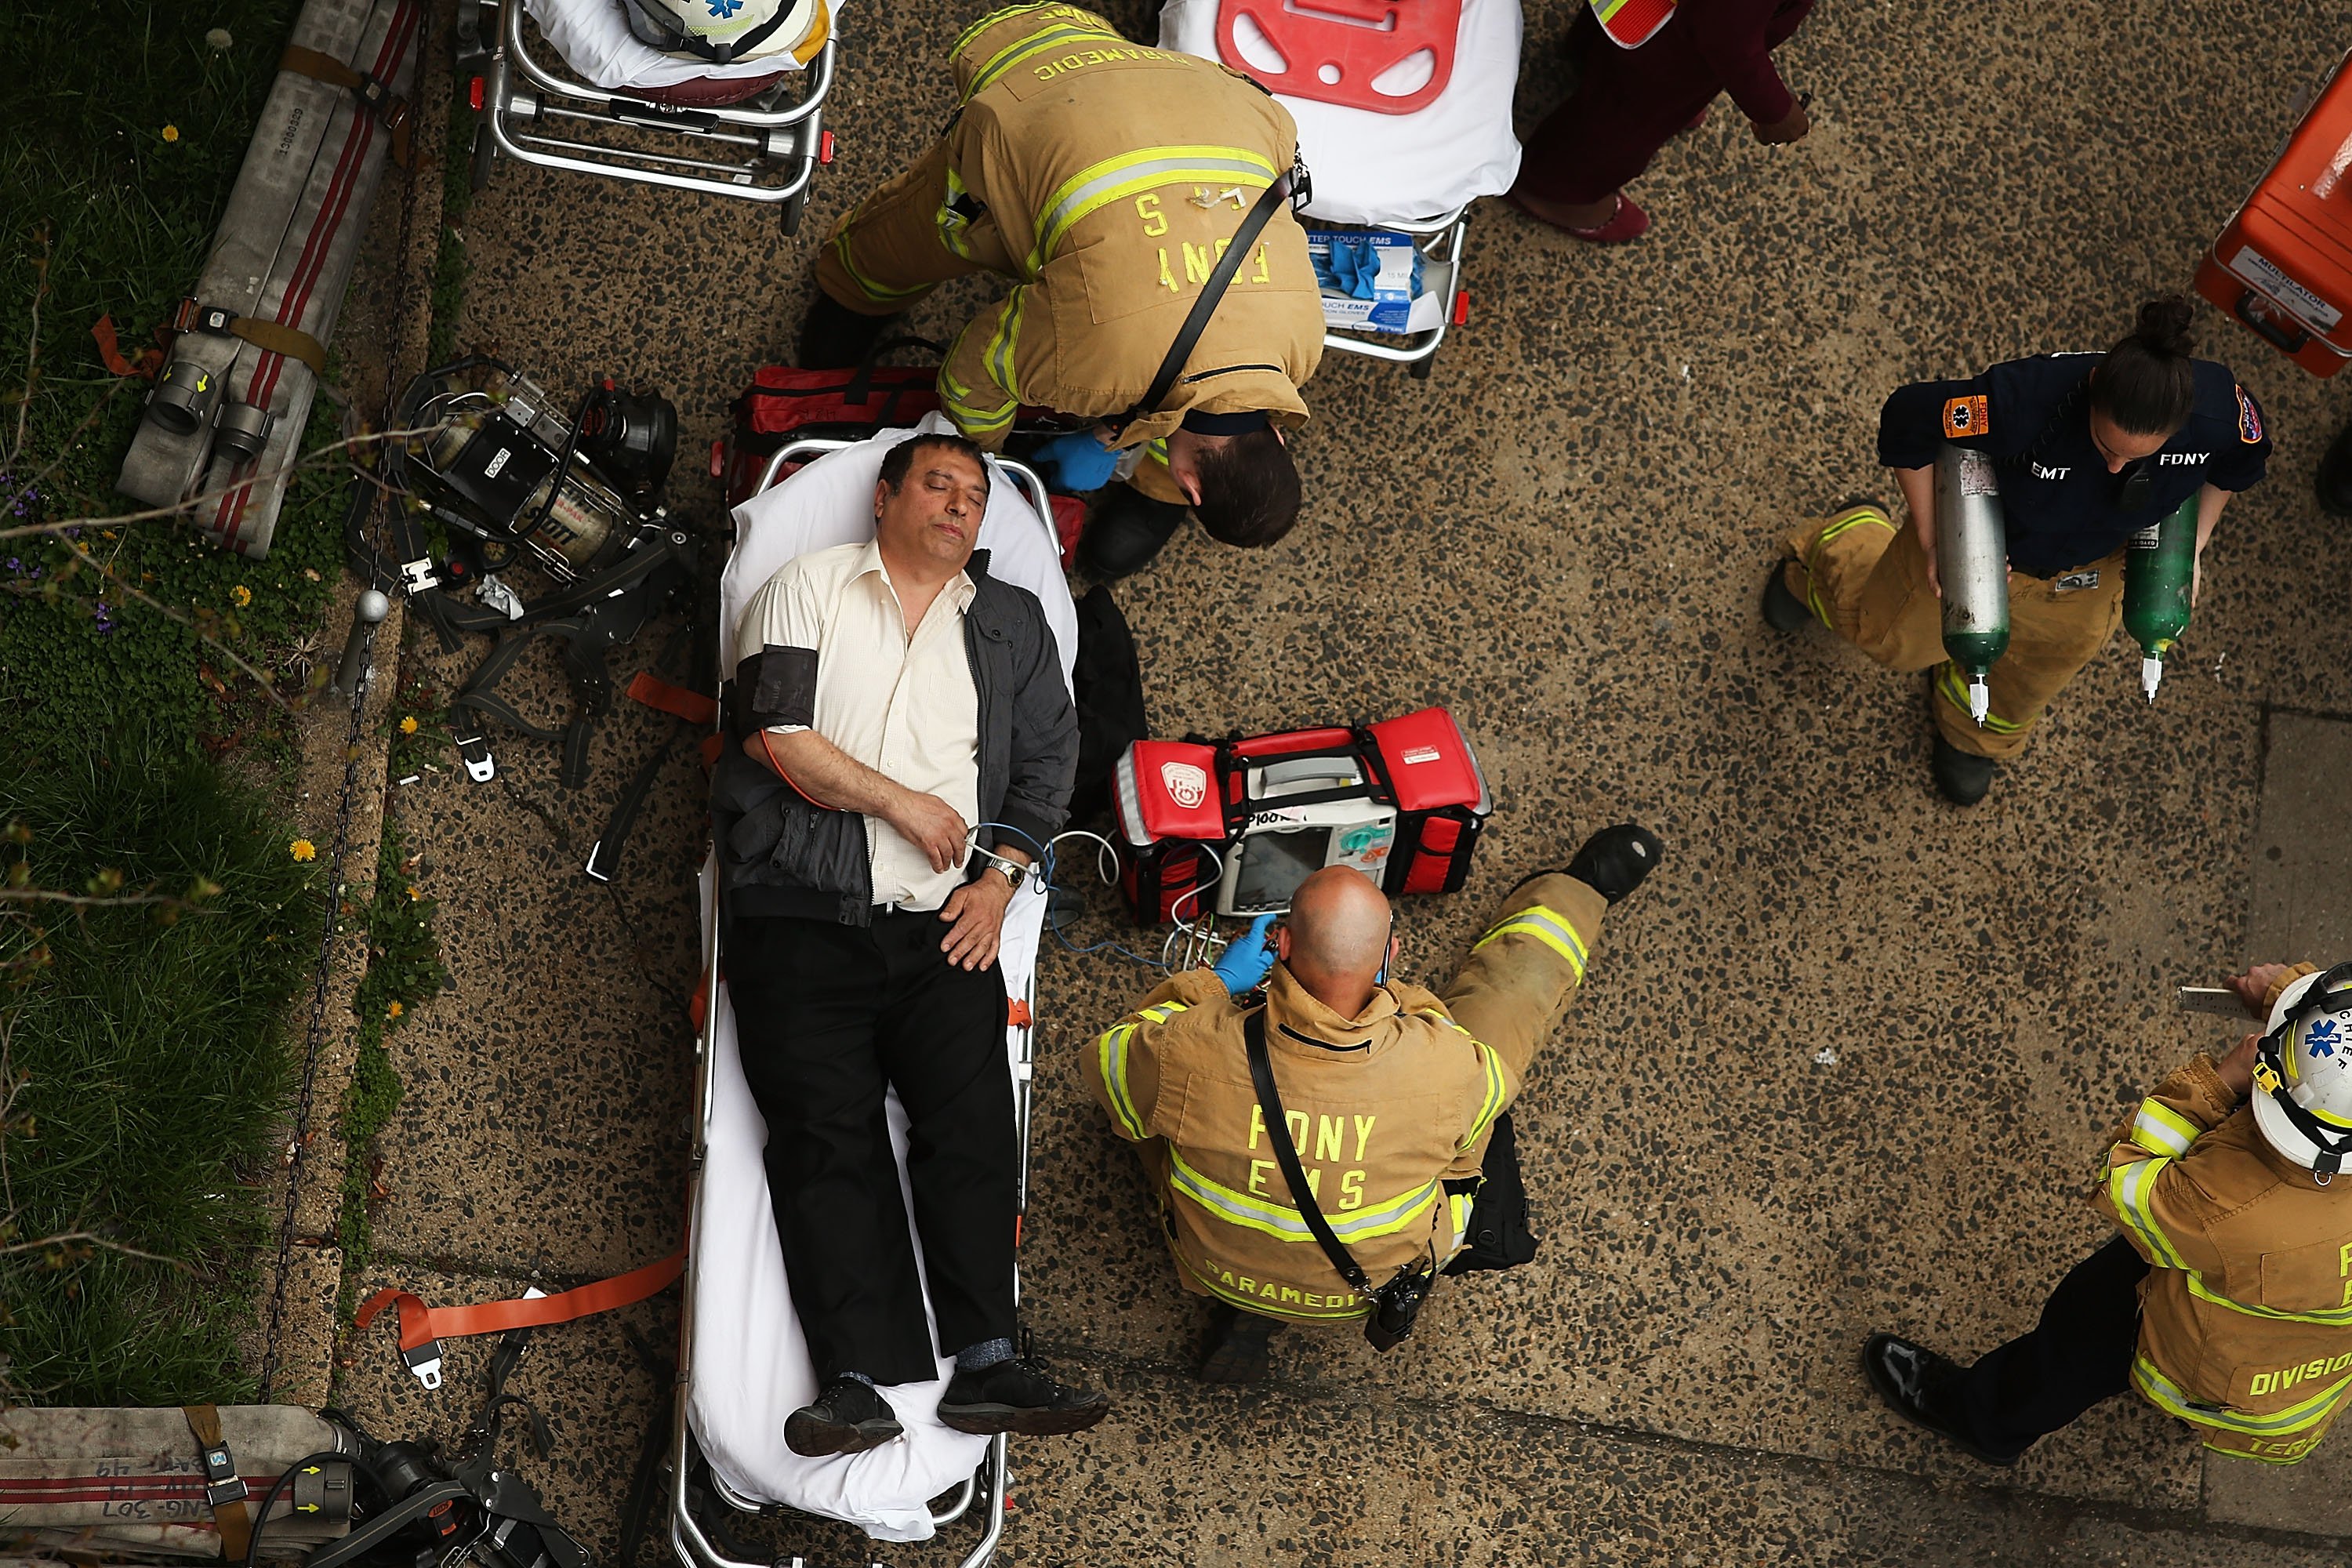 An injured man is aided by New York City firefighters after being evacuated from an emergency staircase following an F train derailment in the Woodside neighborhood of the Queens, N.Y., May 2, 2014. (Robin Schwartz for TIME)